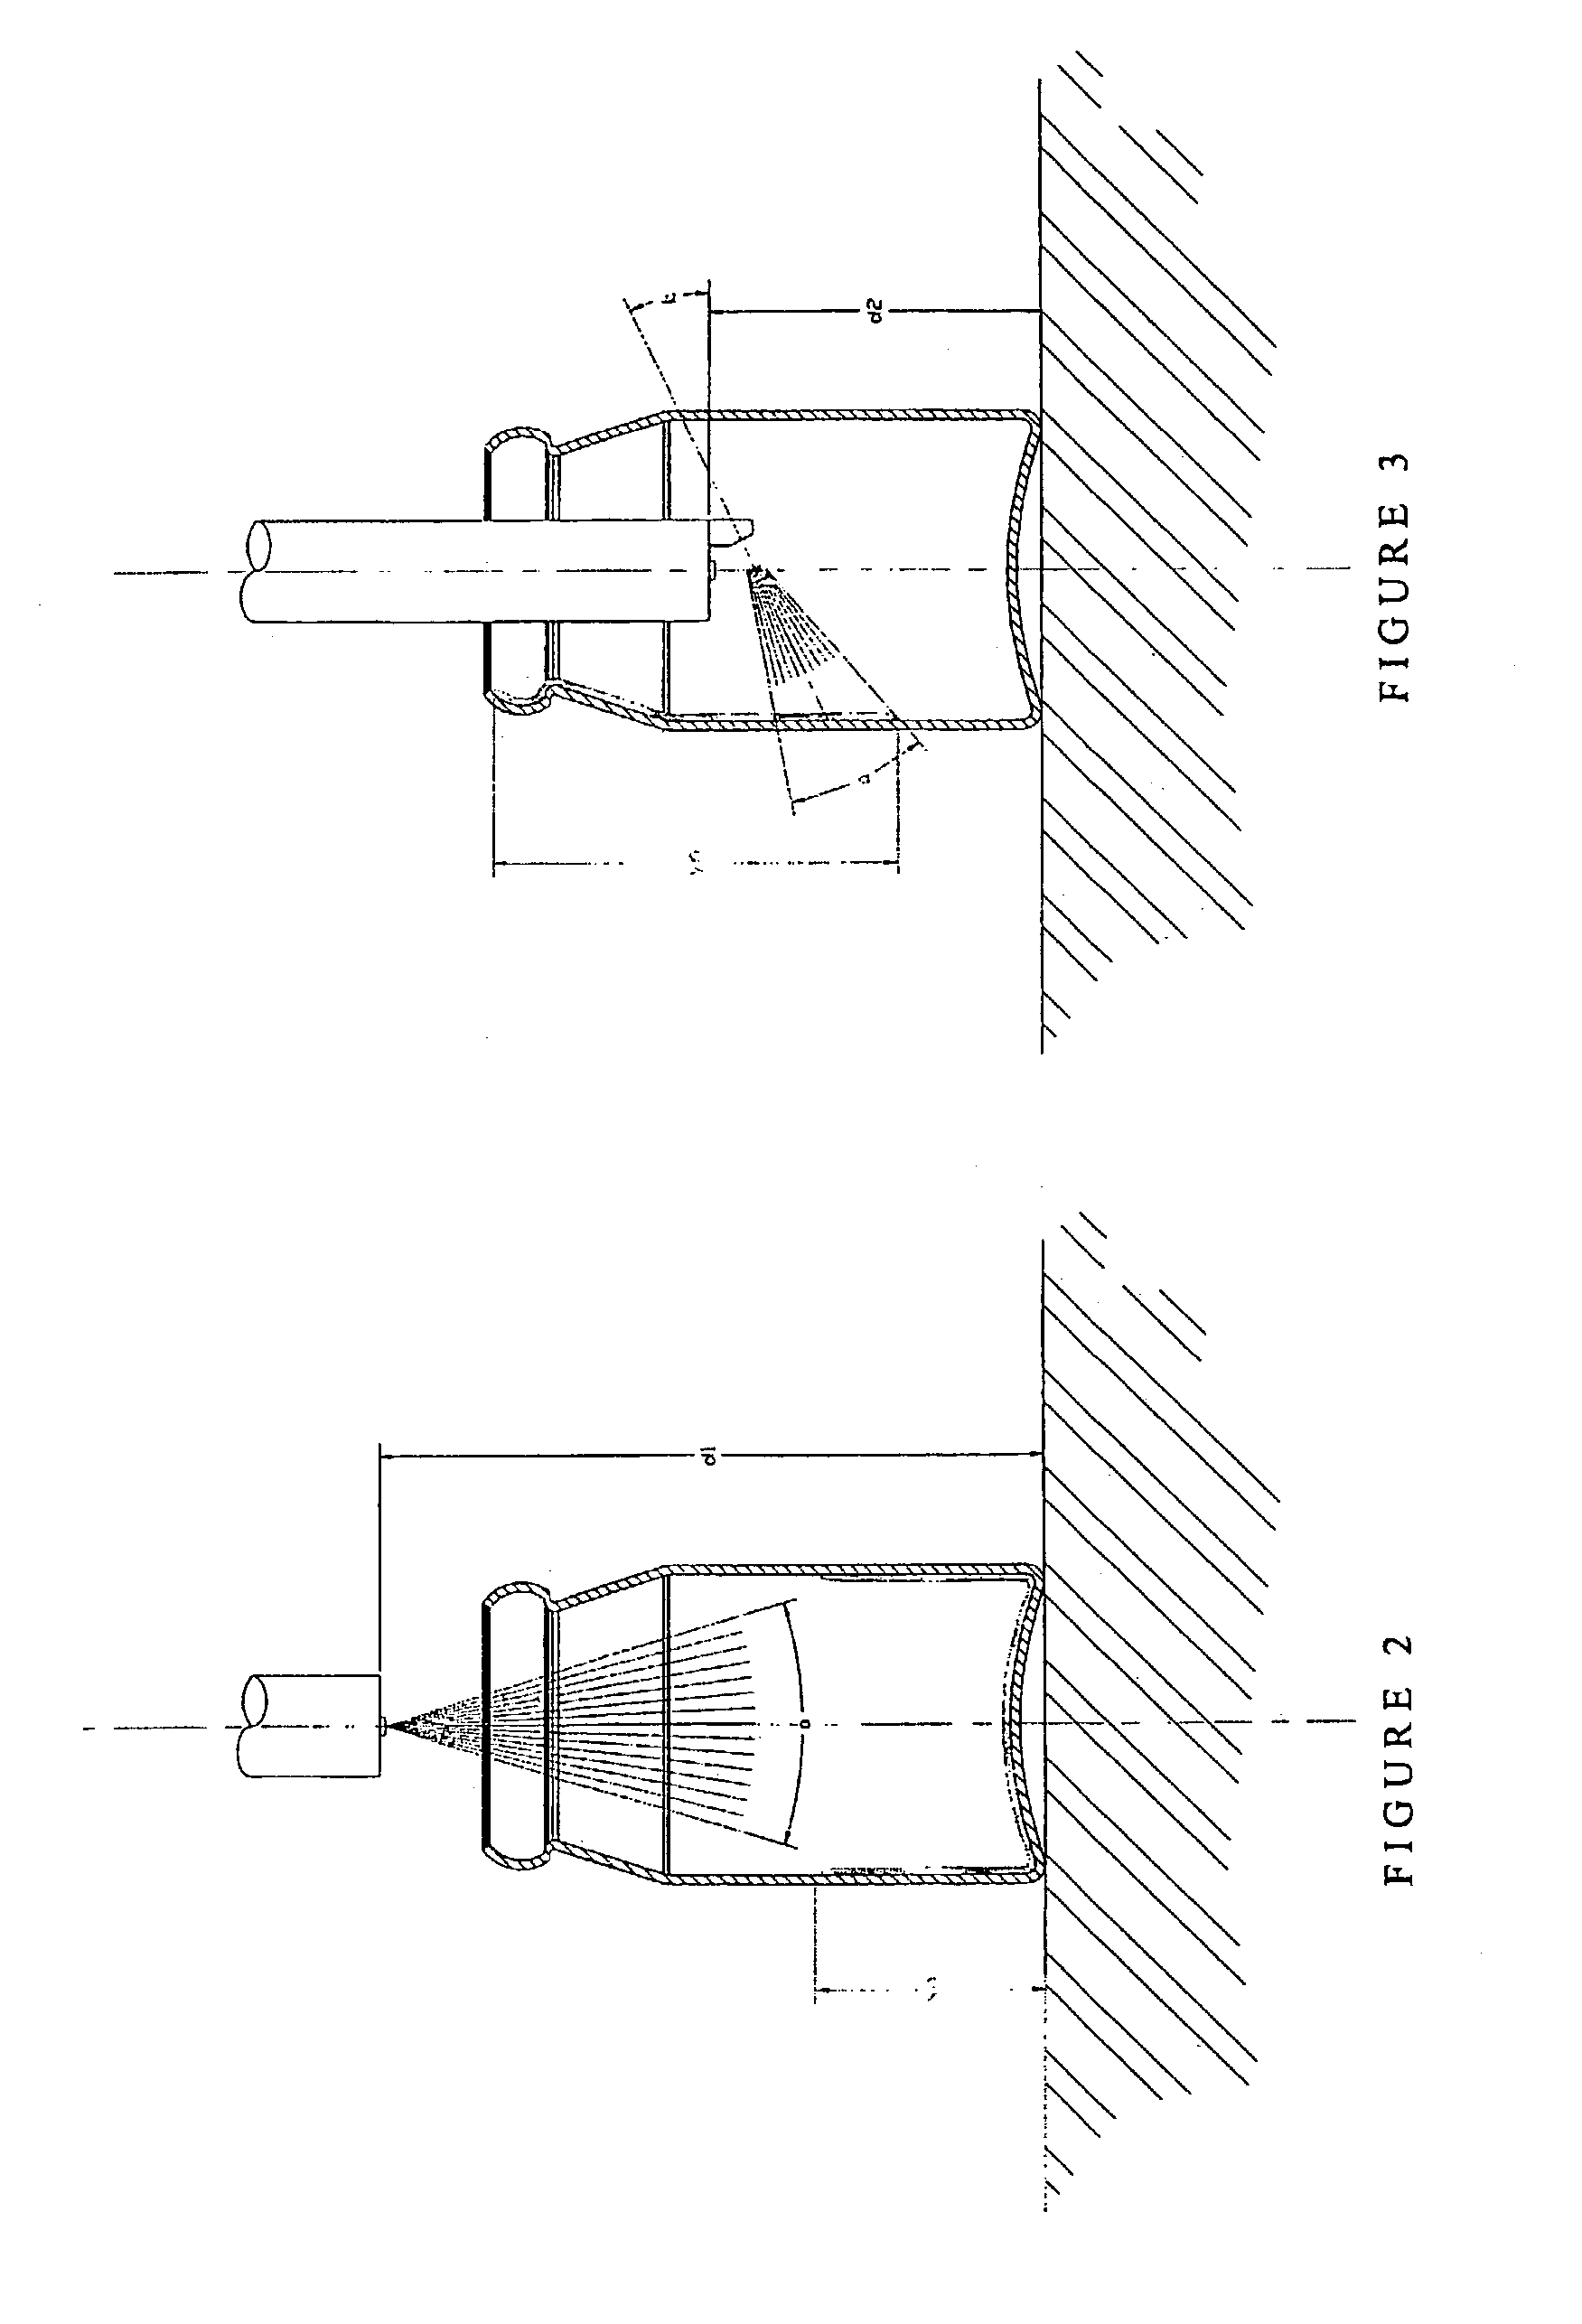 Method for applying a polymer coating to the internal surface of a container